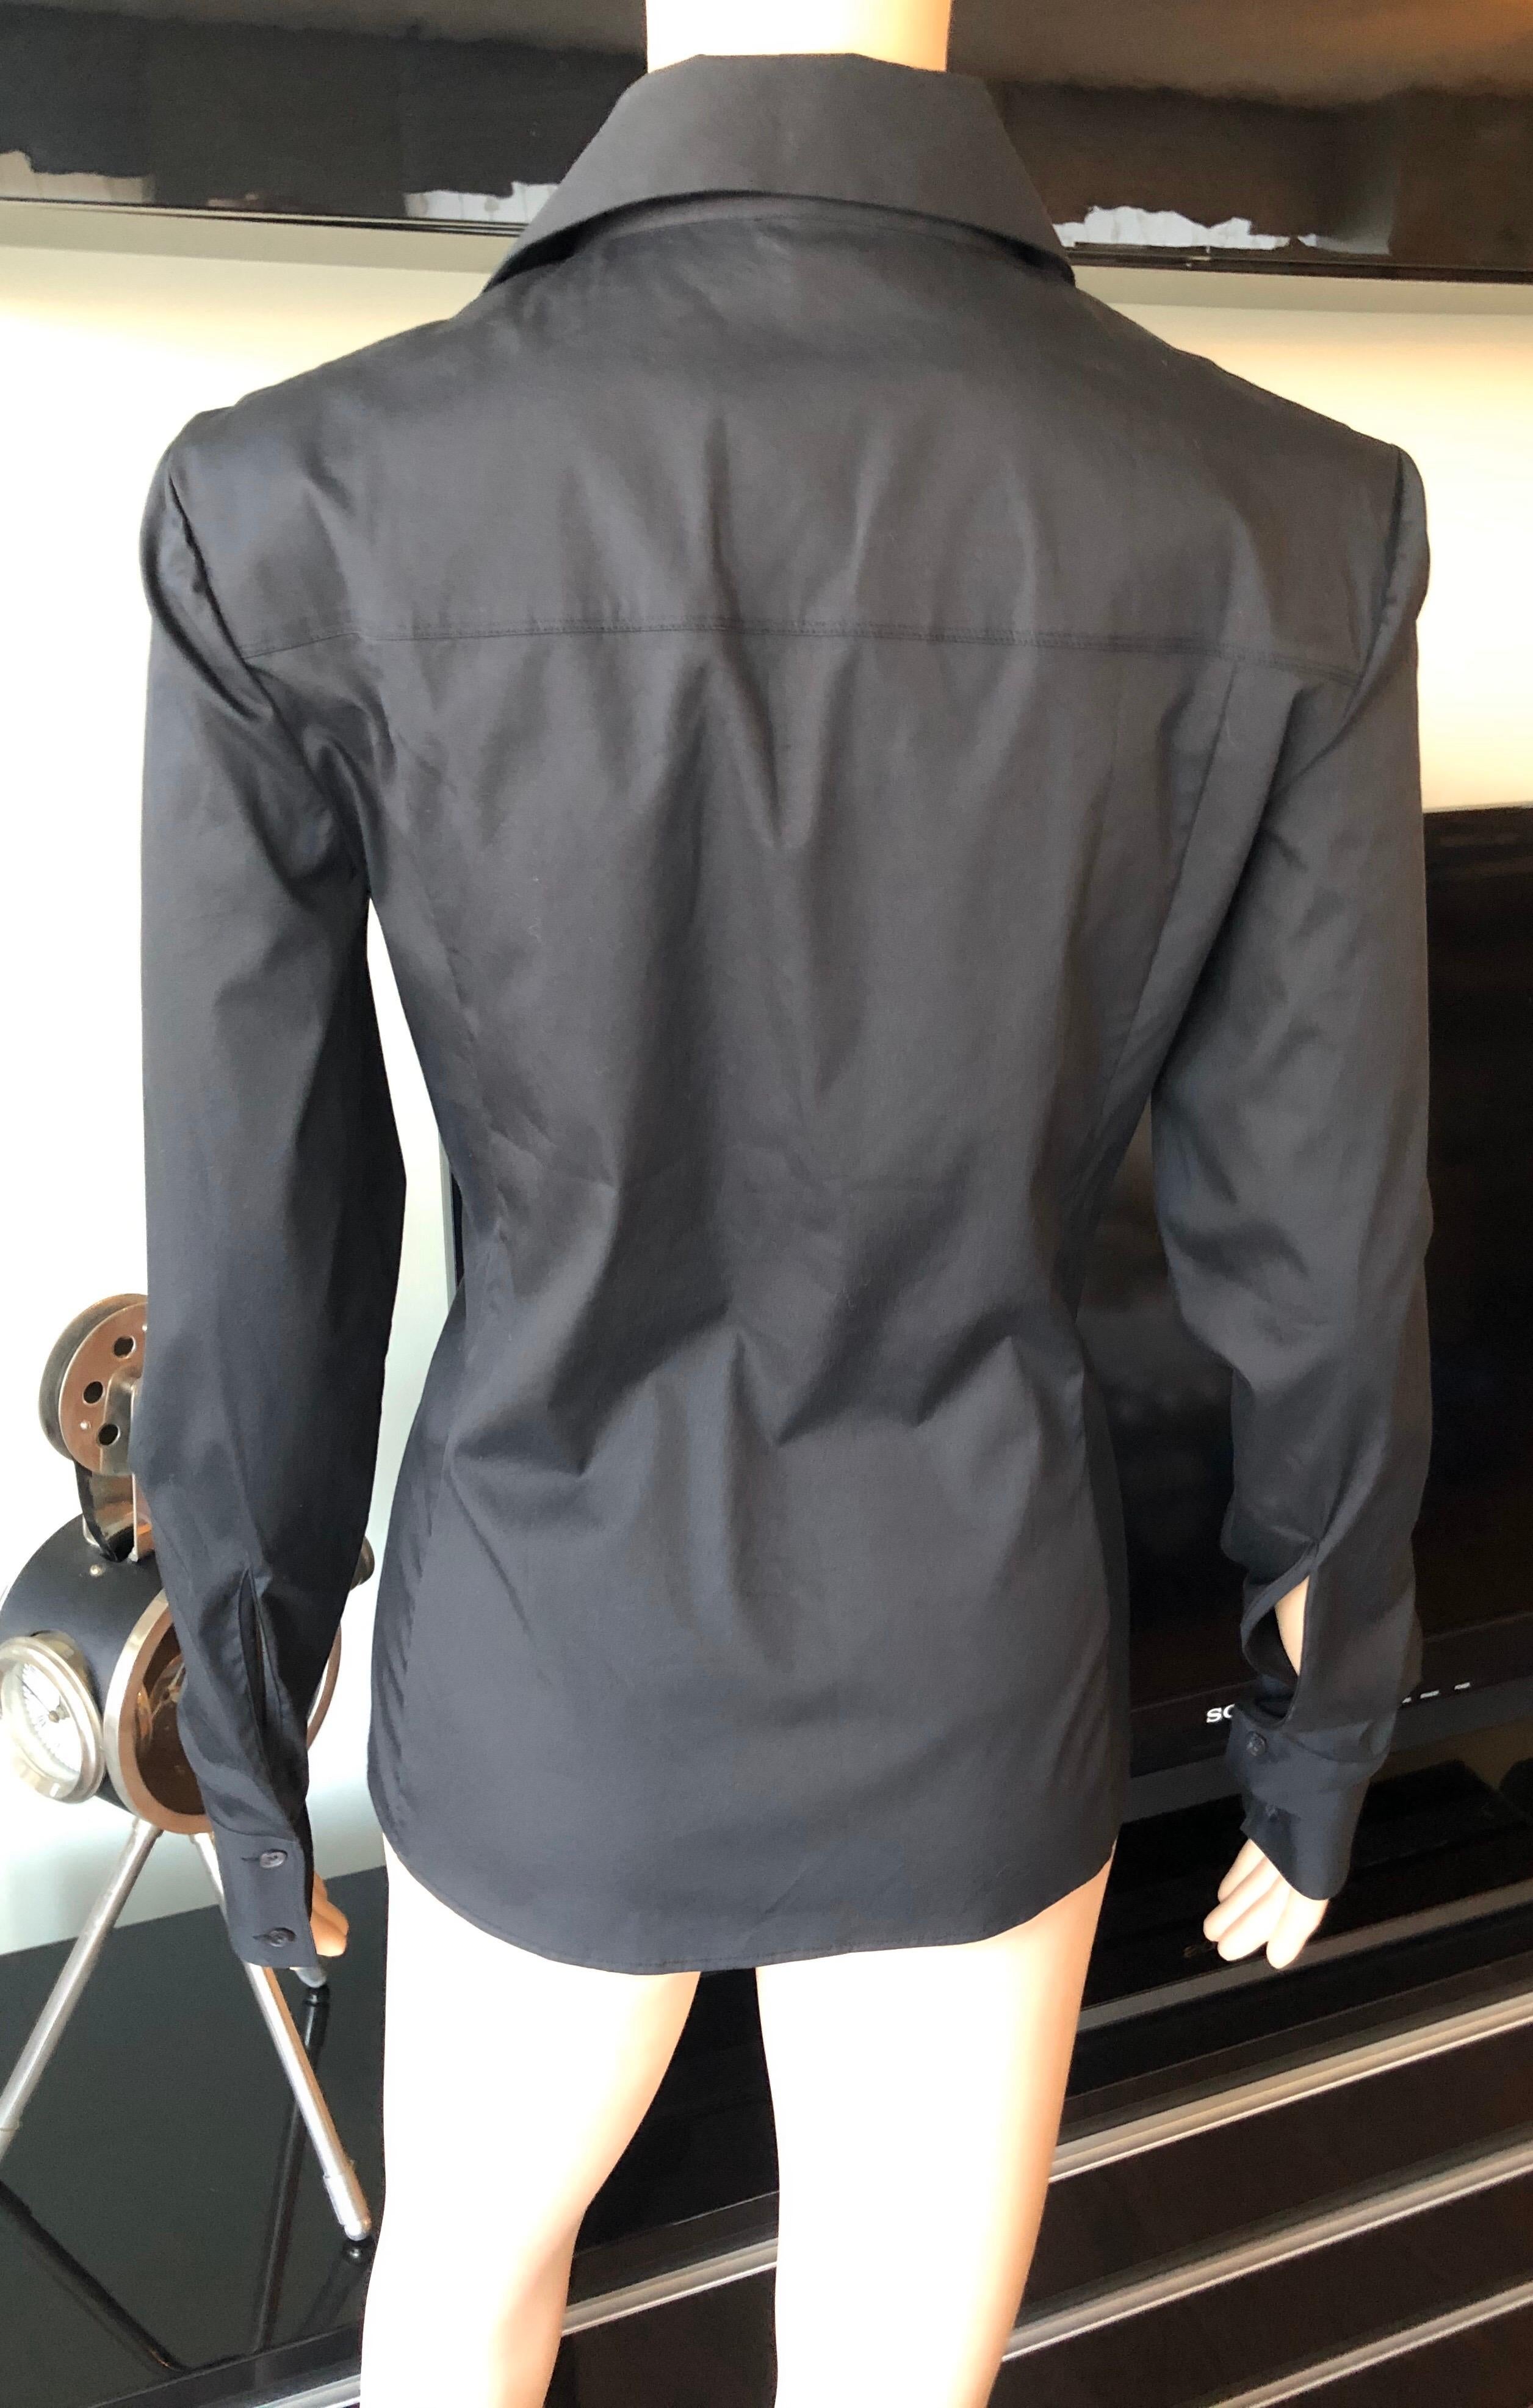 Tom Ford for Gucci S/S 2002 Lace-up Black Top Shirt In Good Condition For Sale In Naples, FL